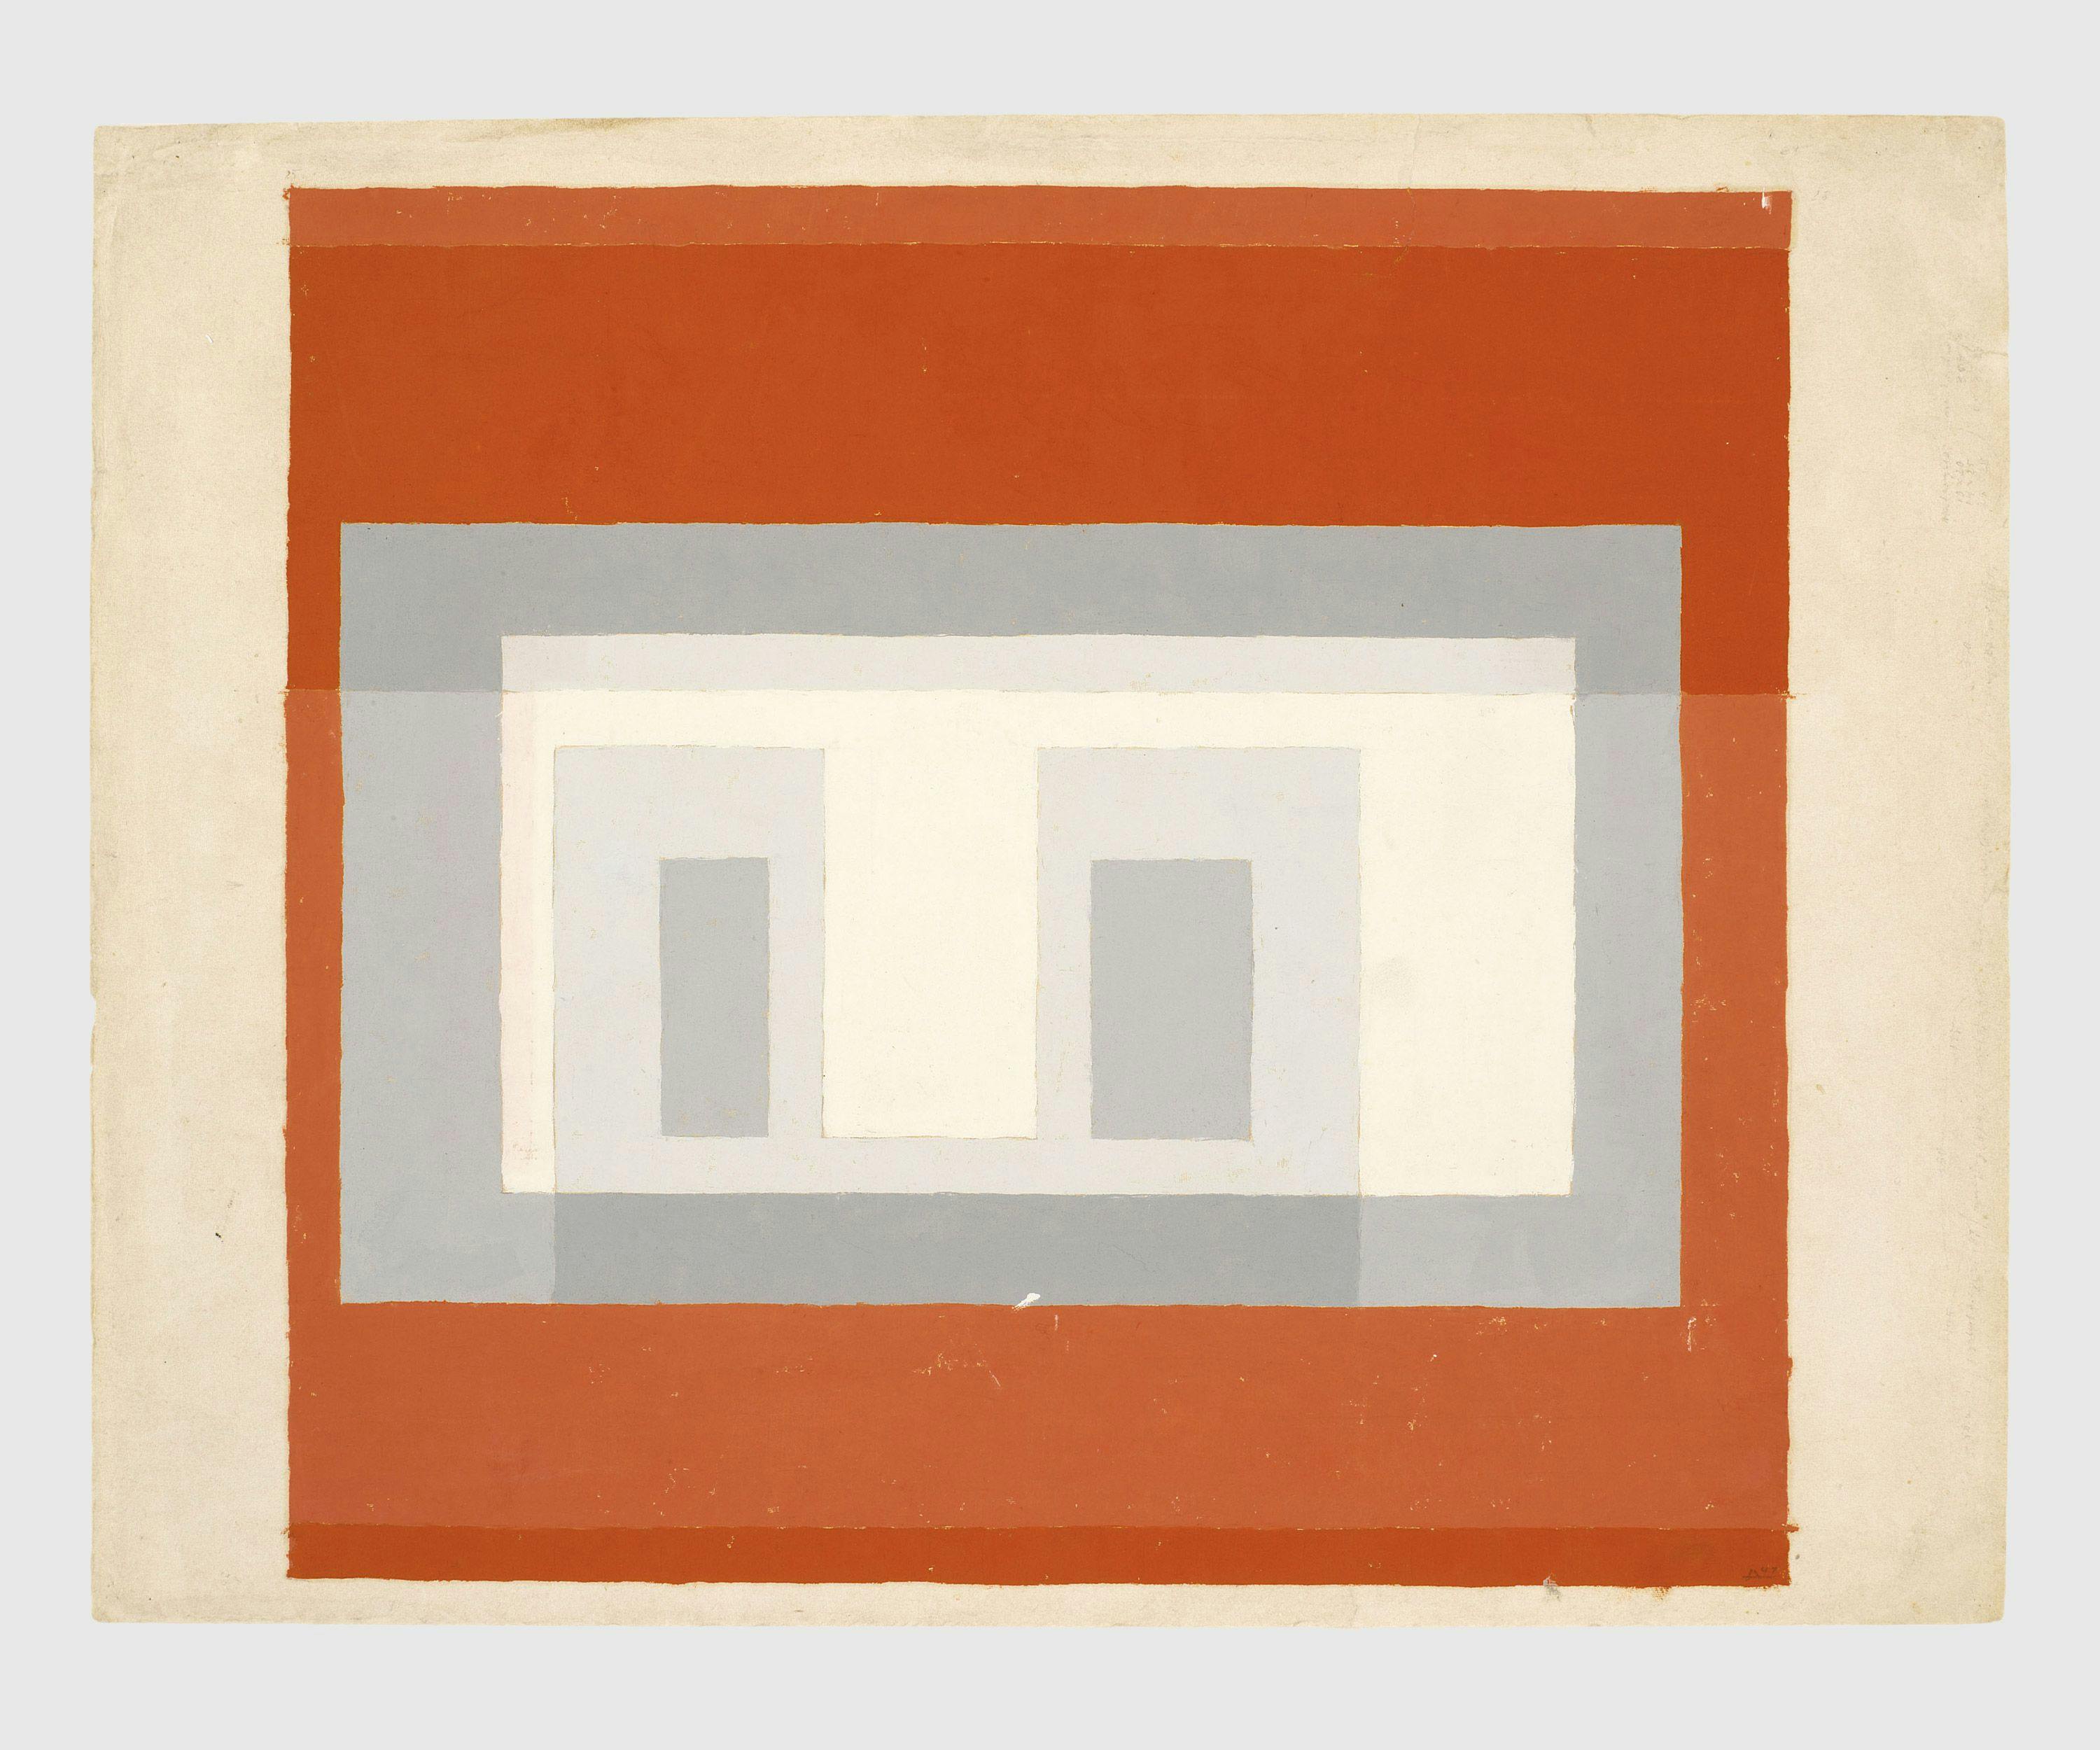 A painting by Josef Albers, called Untitled Study for a Variant, Adobe, dated 1947.